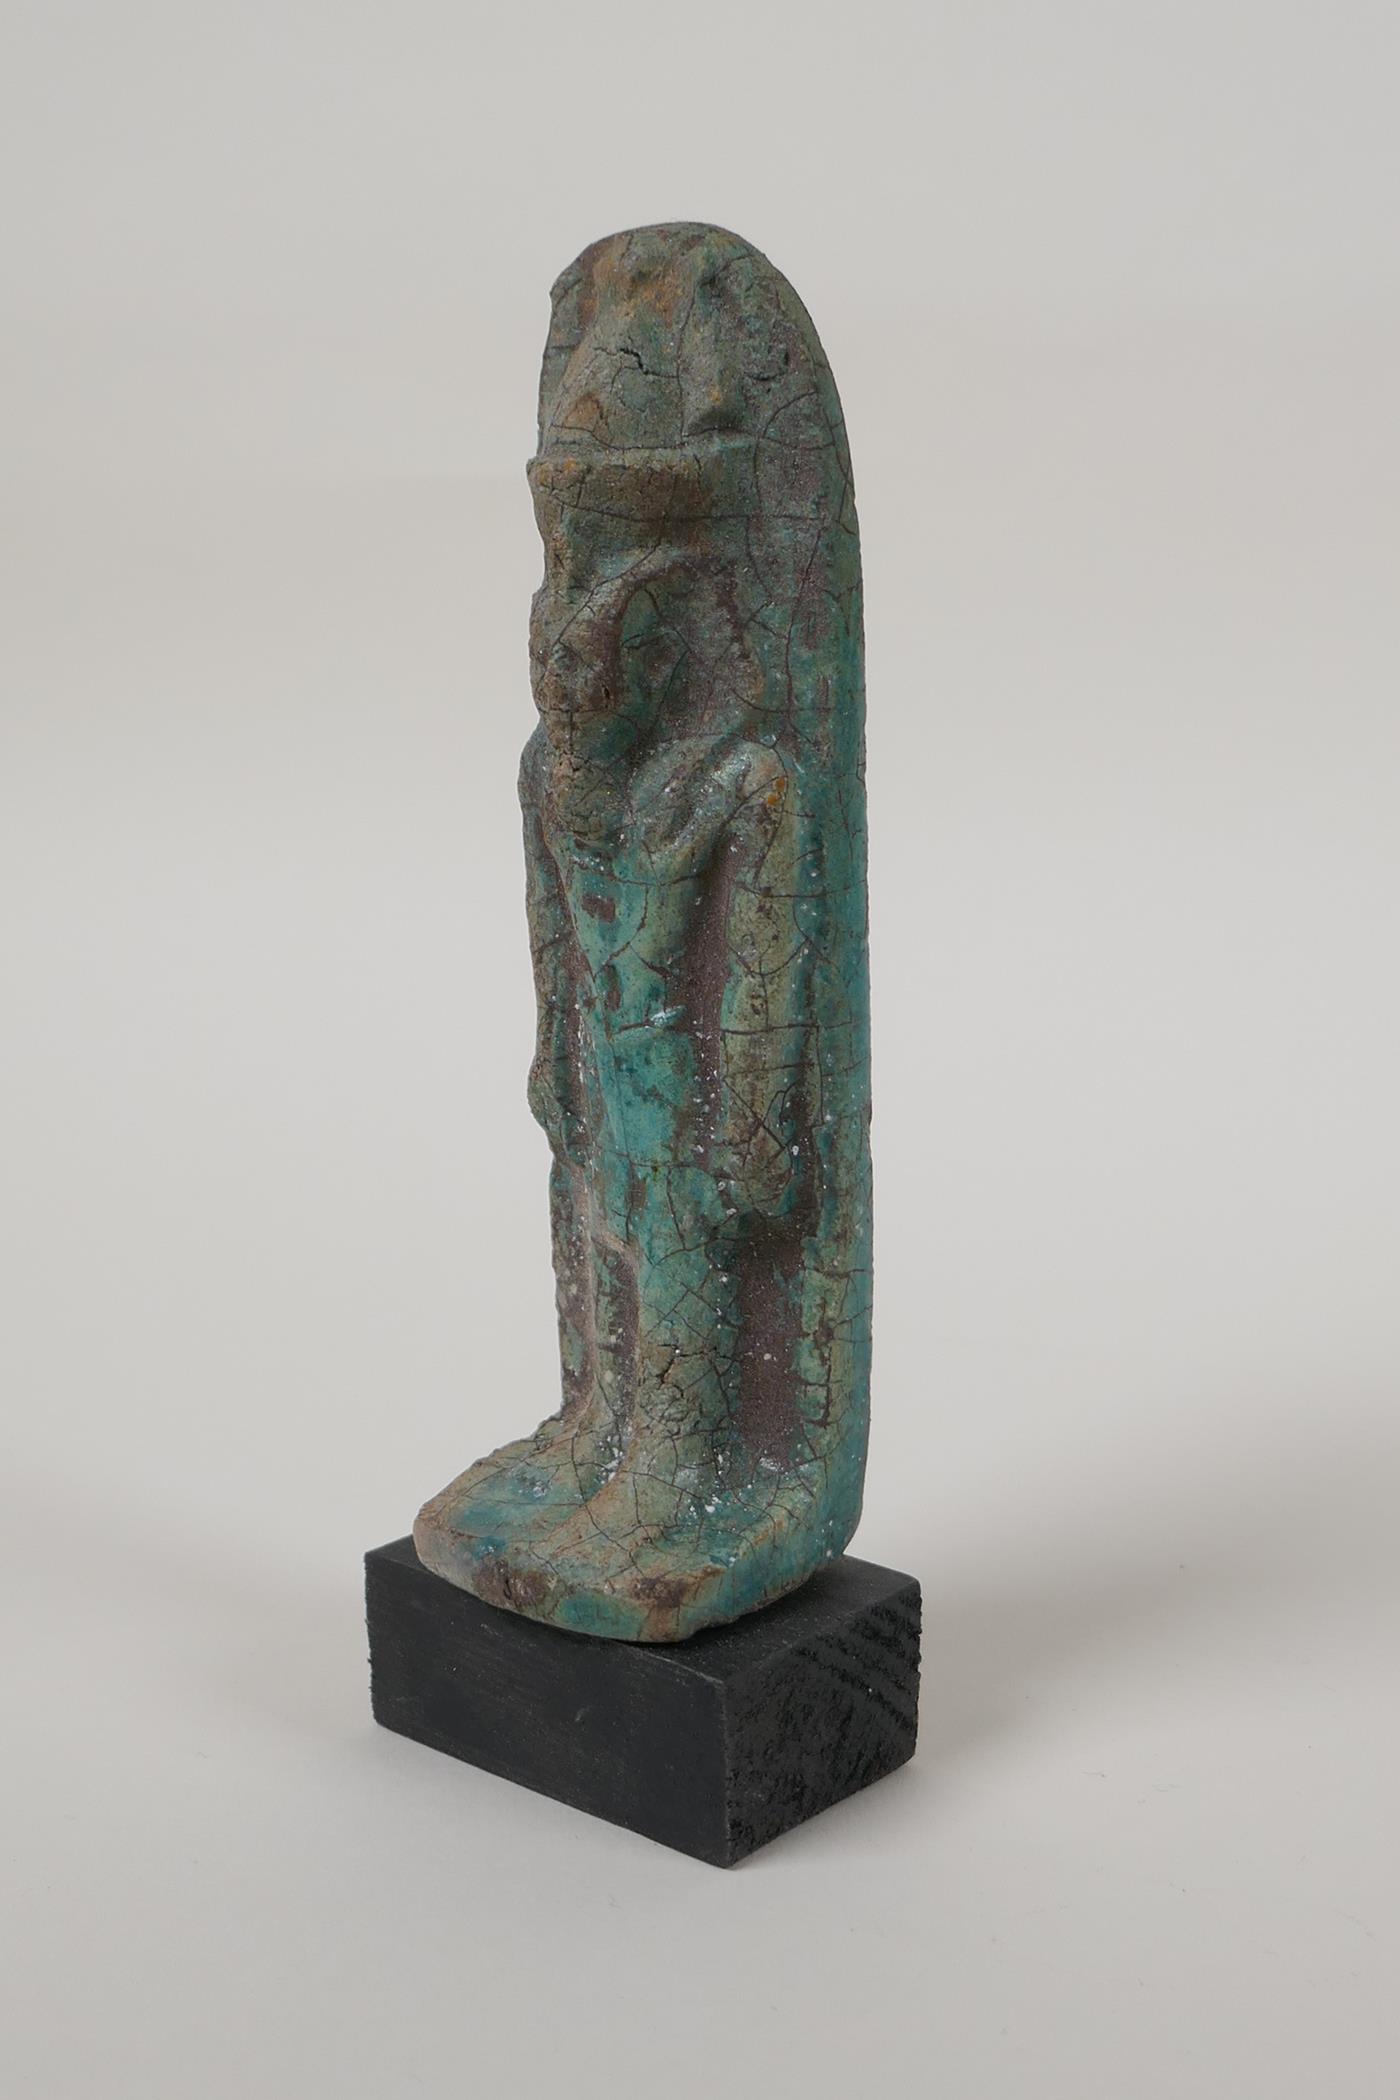 An Egyptian turquoise glazed faience shabti, mounted on a display base, 5" high - Image 4 of 4